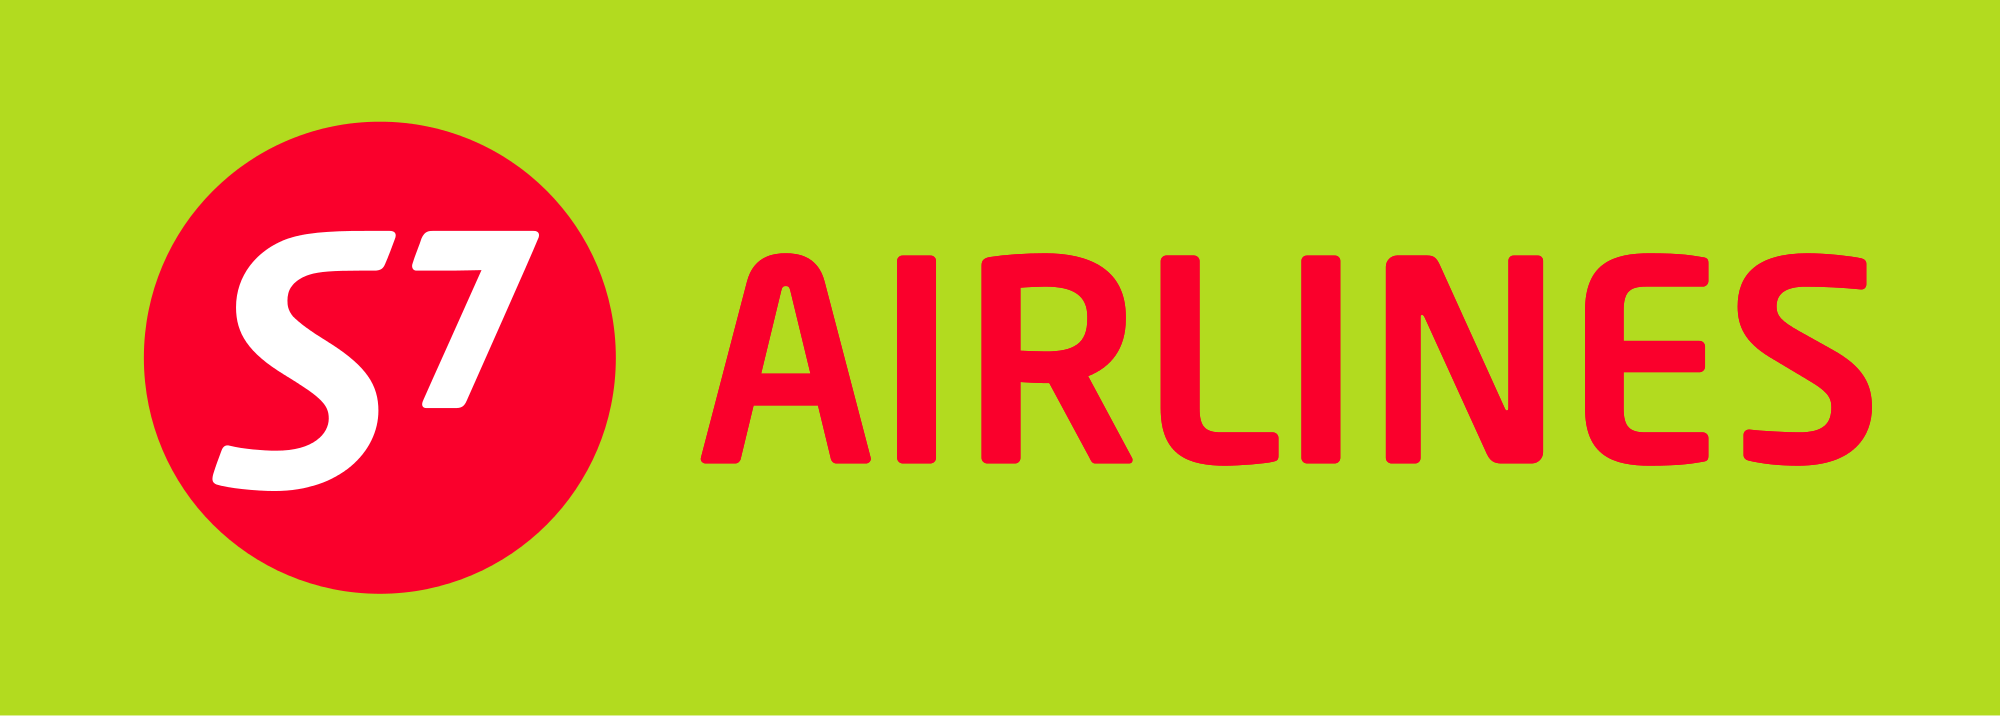 A Green and Red Airline Logo - S7 Airlines Green Logo.svg